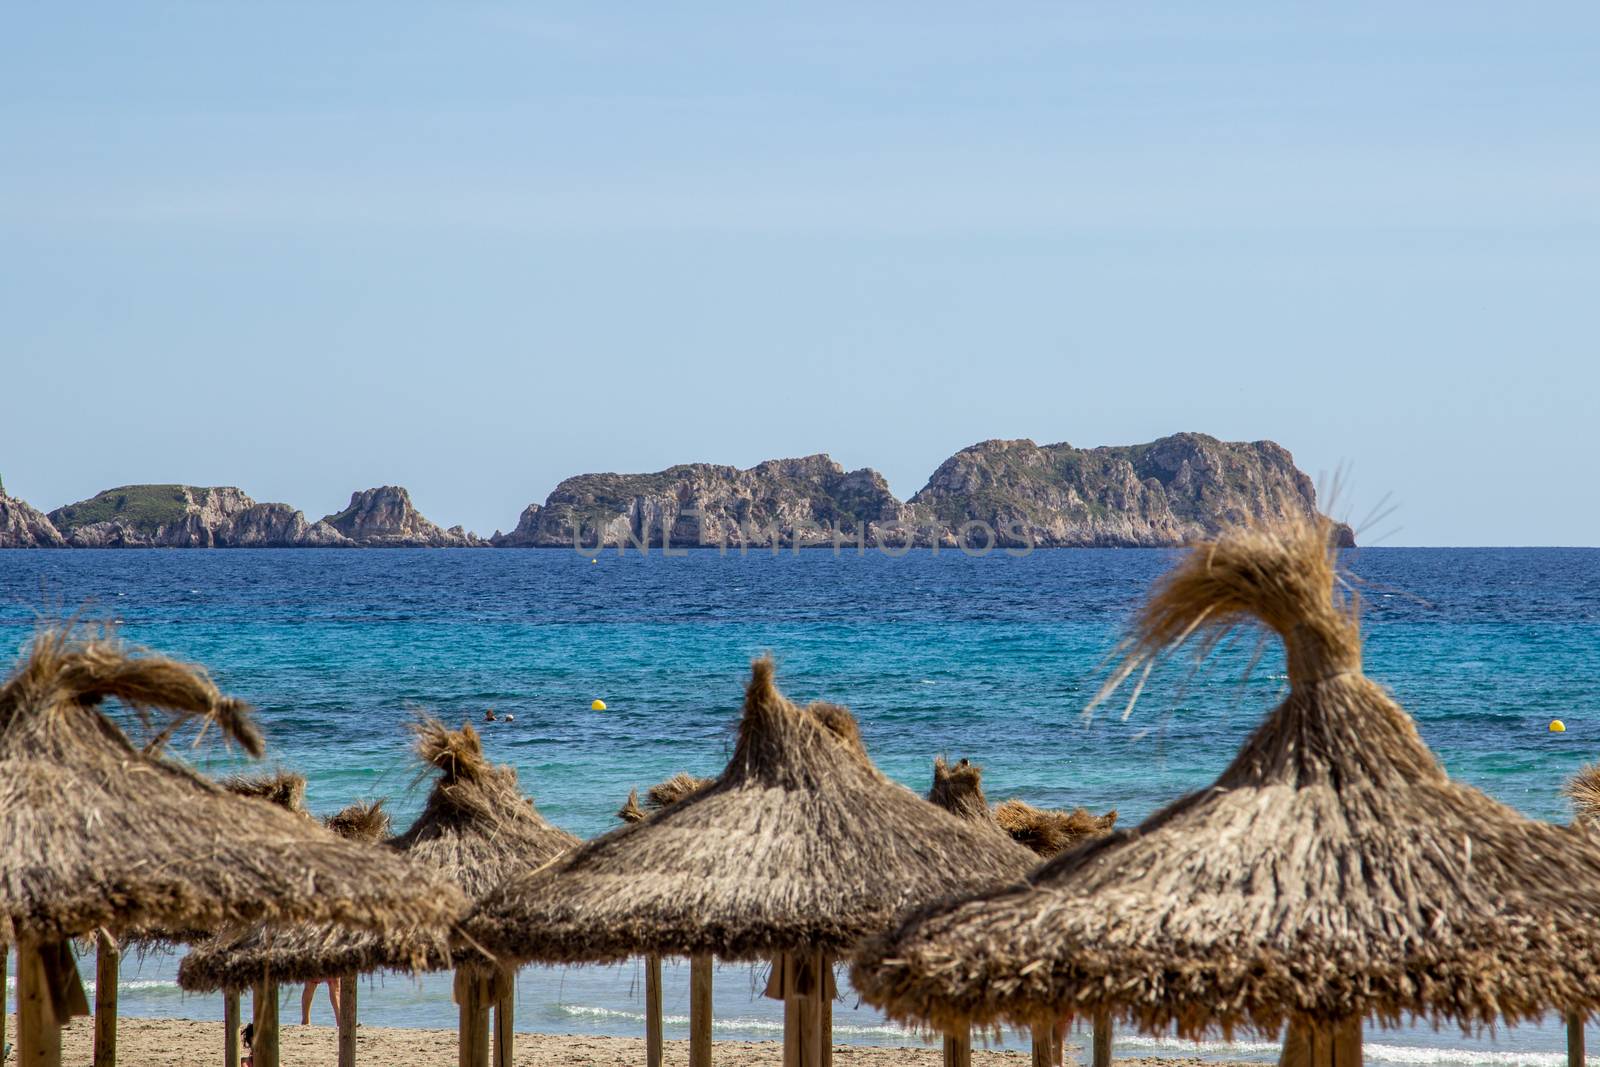 Straw sunshade on the beach,  turquoise water and rocks at S' Arenal, Mallorca